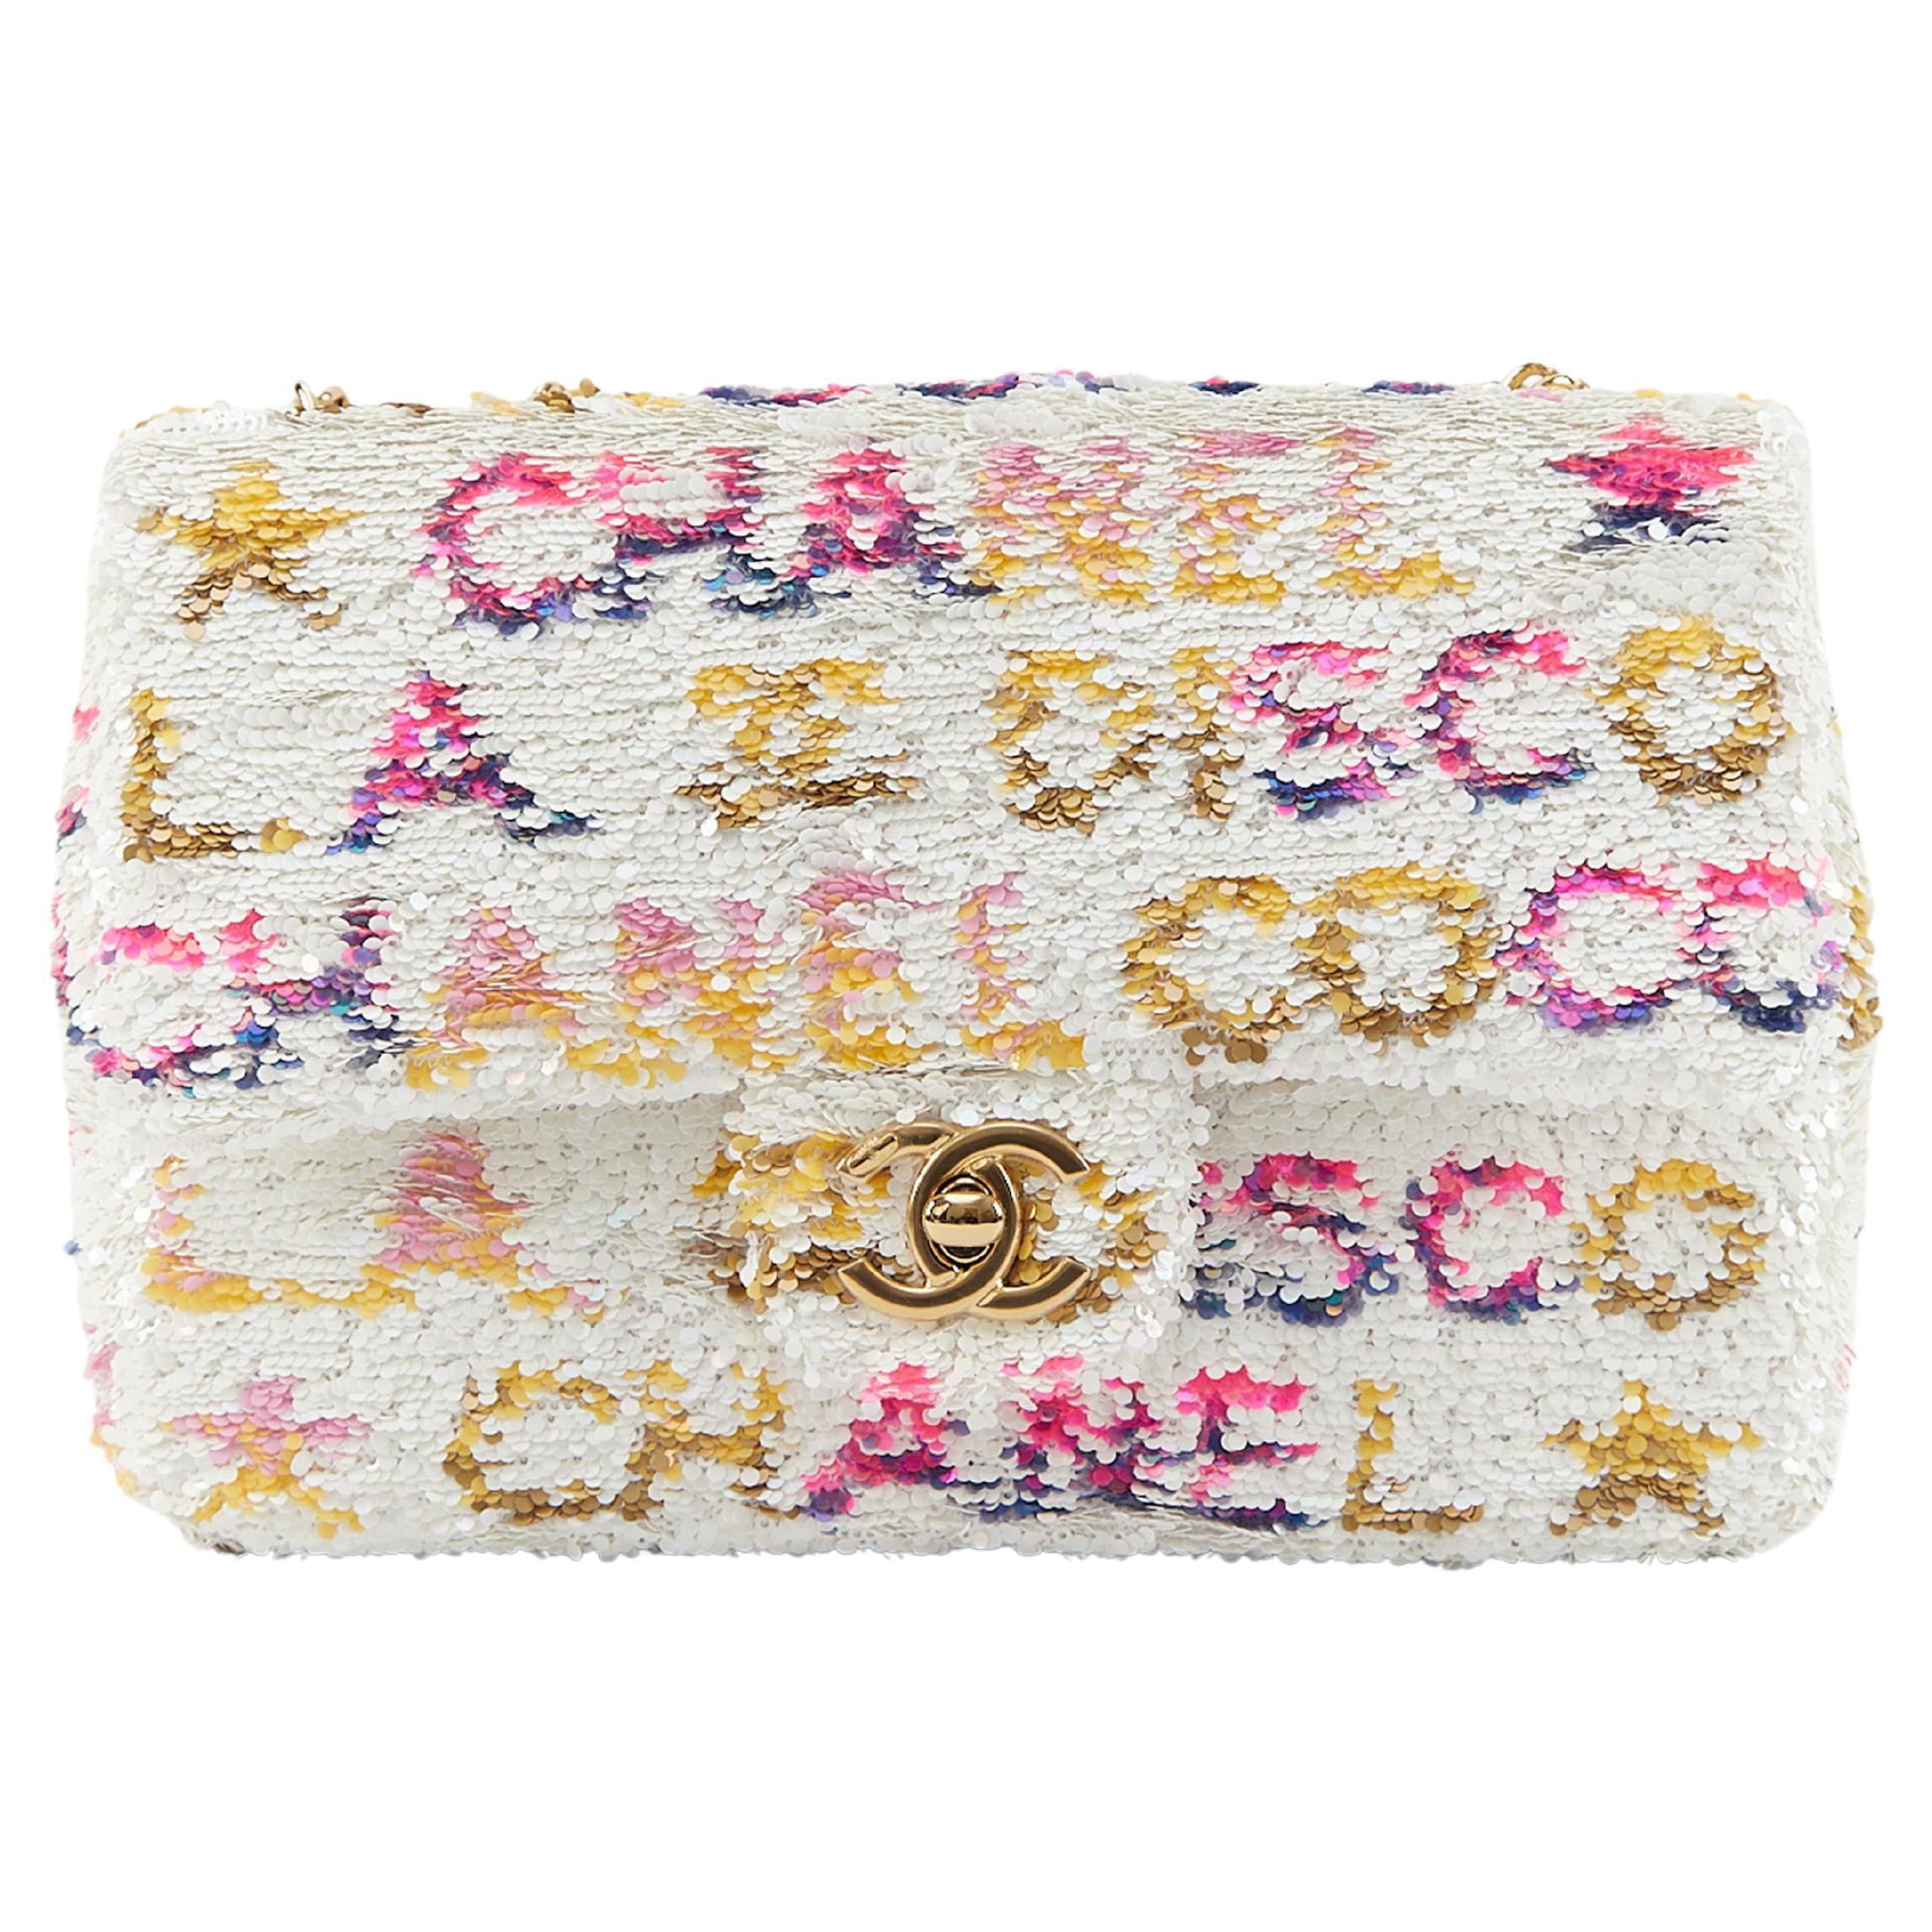 CHANEL MINI RECTANGLE DISCO FLAP BAG WHITE, YELLOW & PINK Sequins & Calfskin wit For Sale